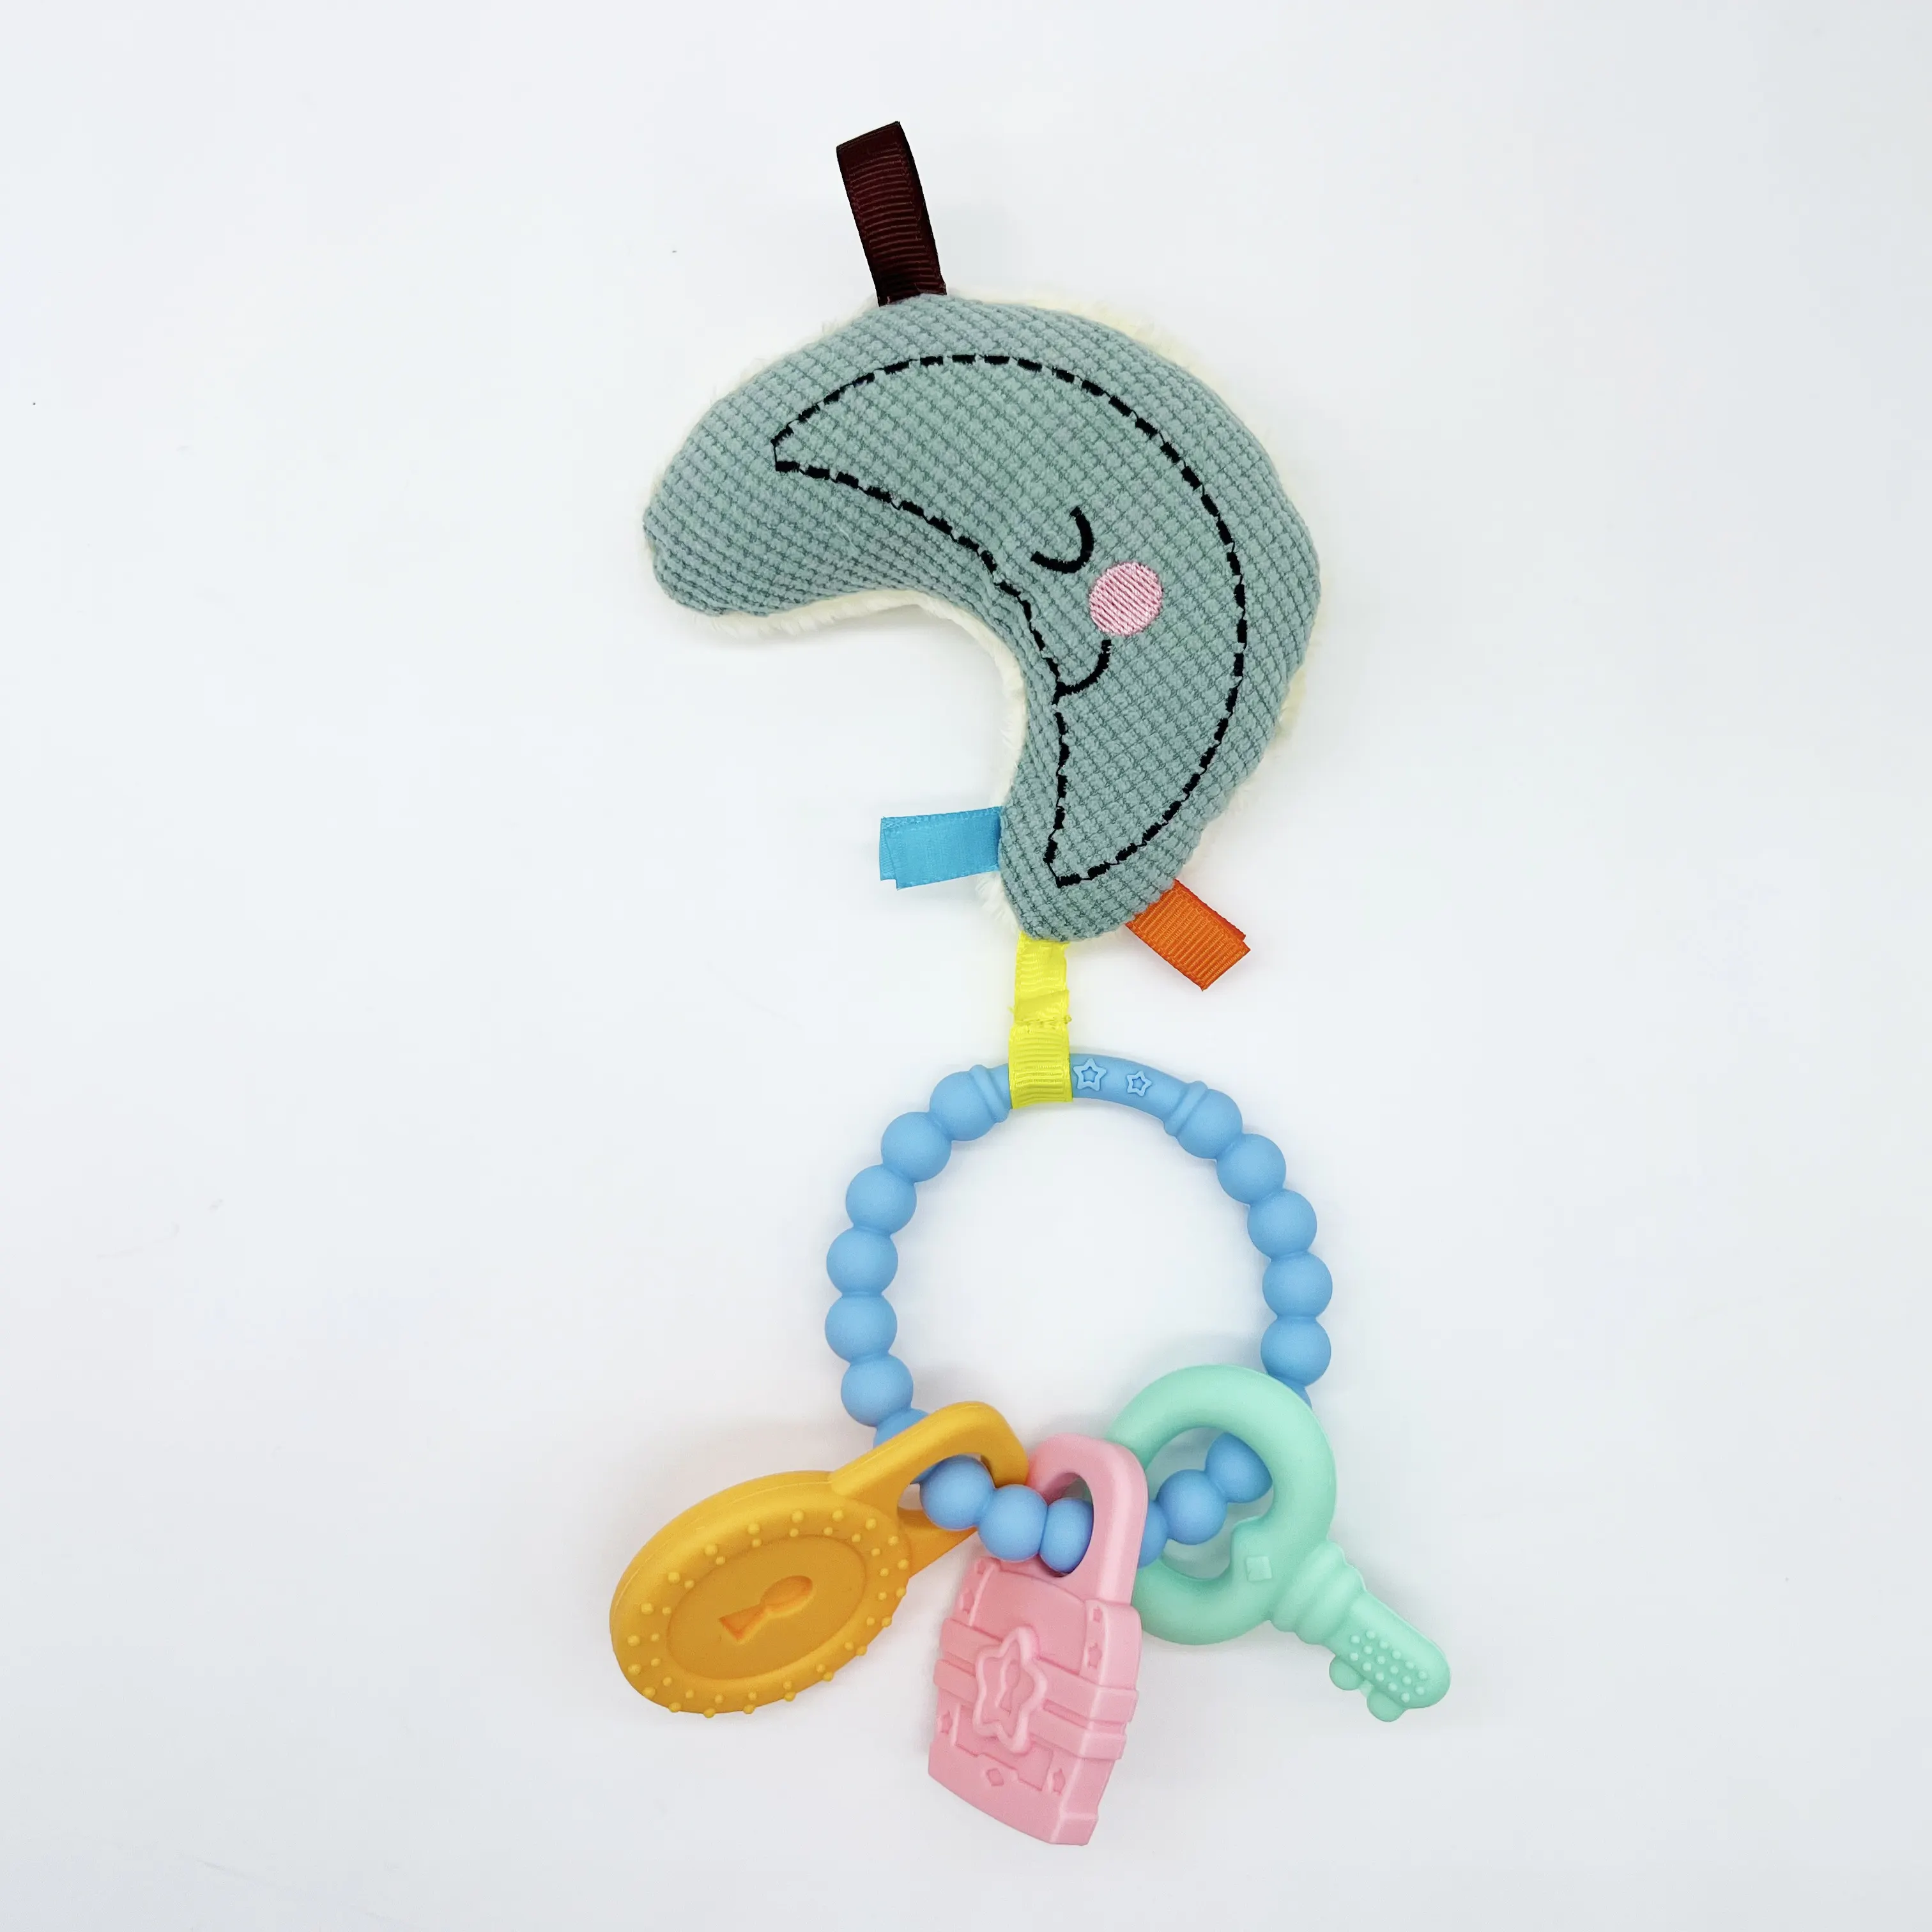 Moon / Cloudy Design Stuffed Animal Teether Pacifier Holder Silicone Teether Plush Toy